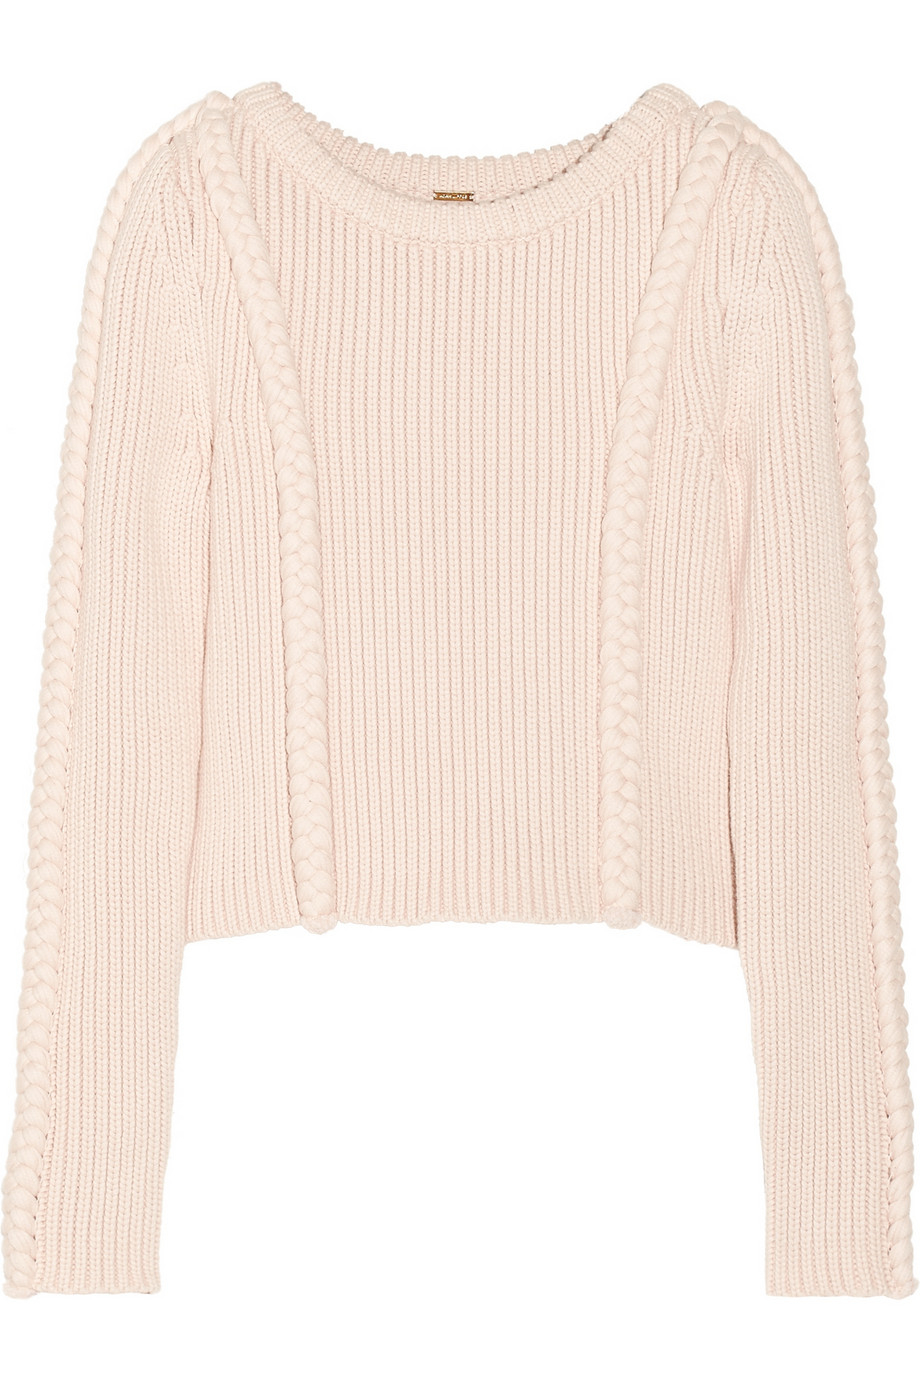 Adam lippes Cropped Chunky-Knit Cotton-Blend Sweater in Natural | Lyst